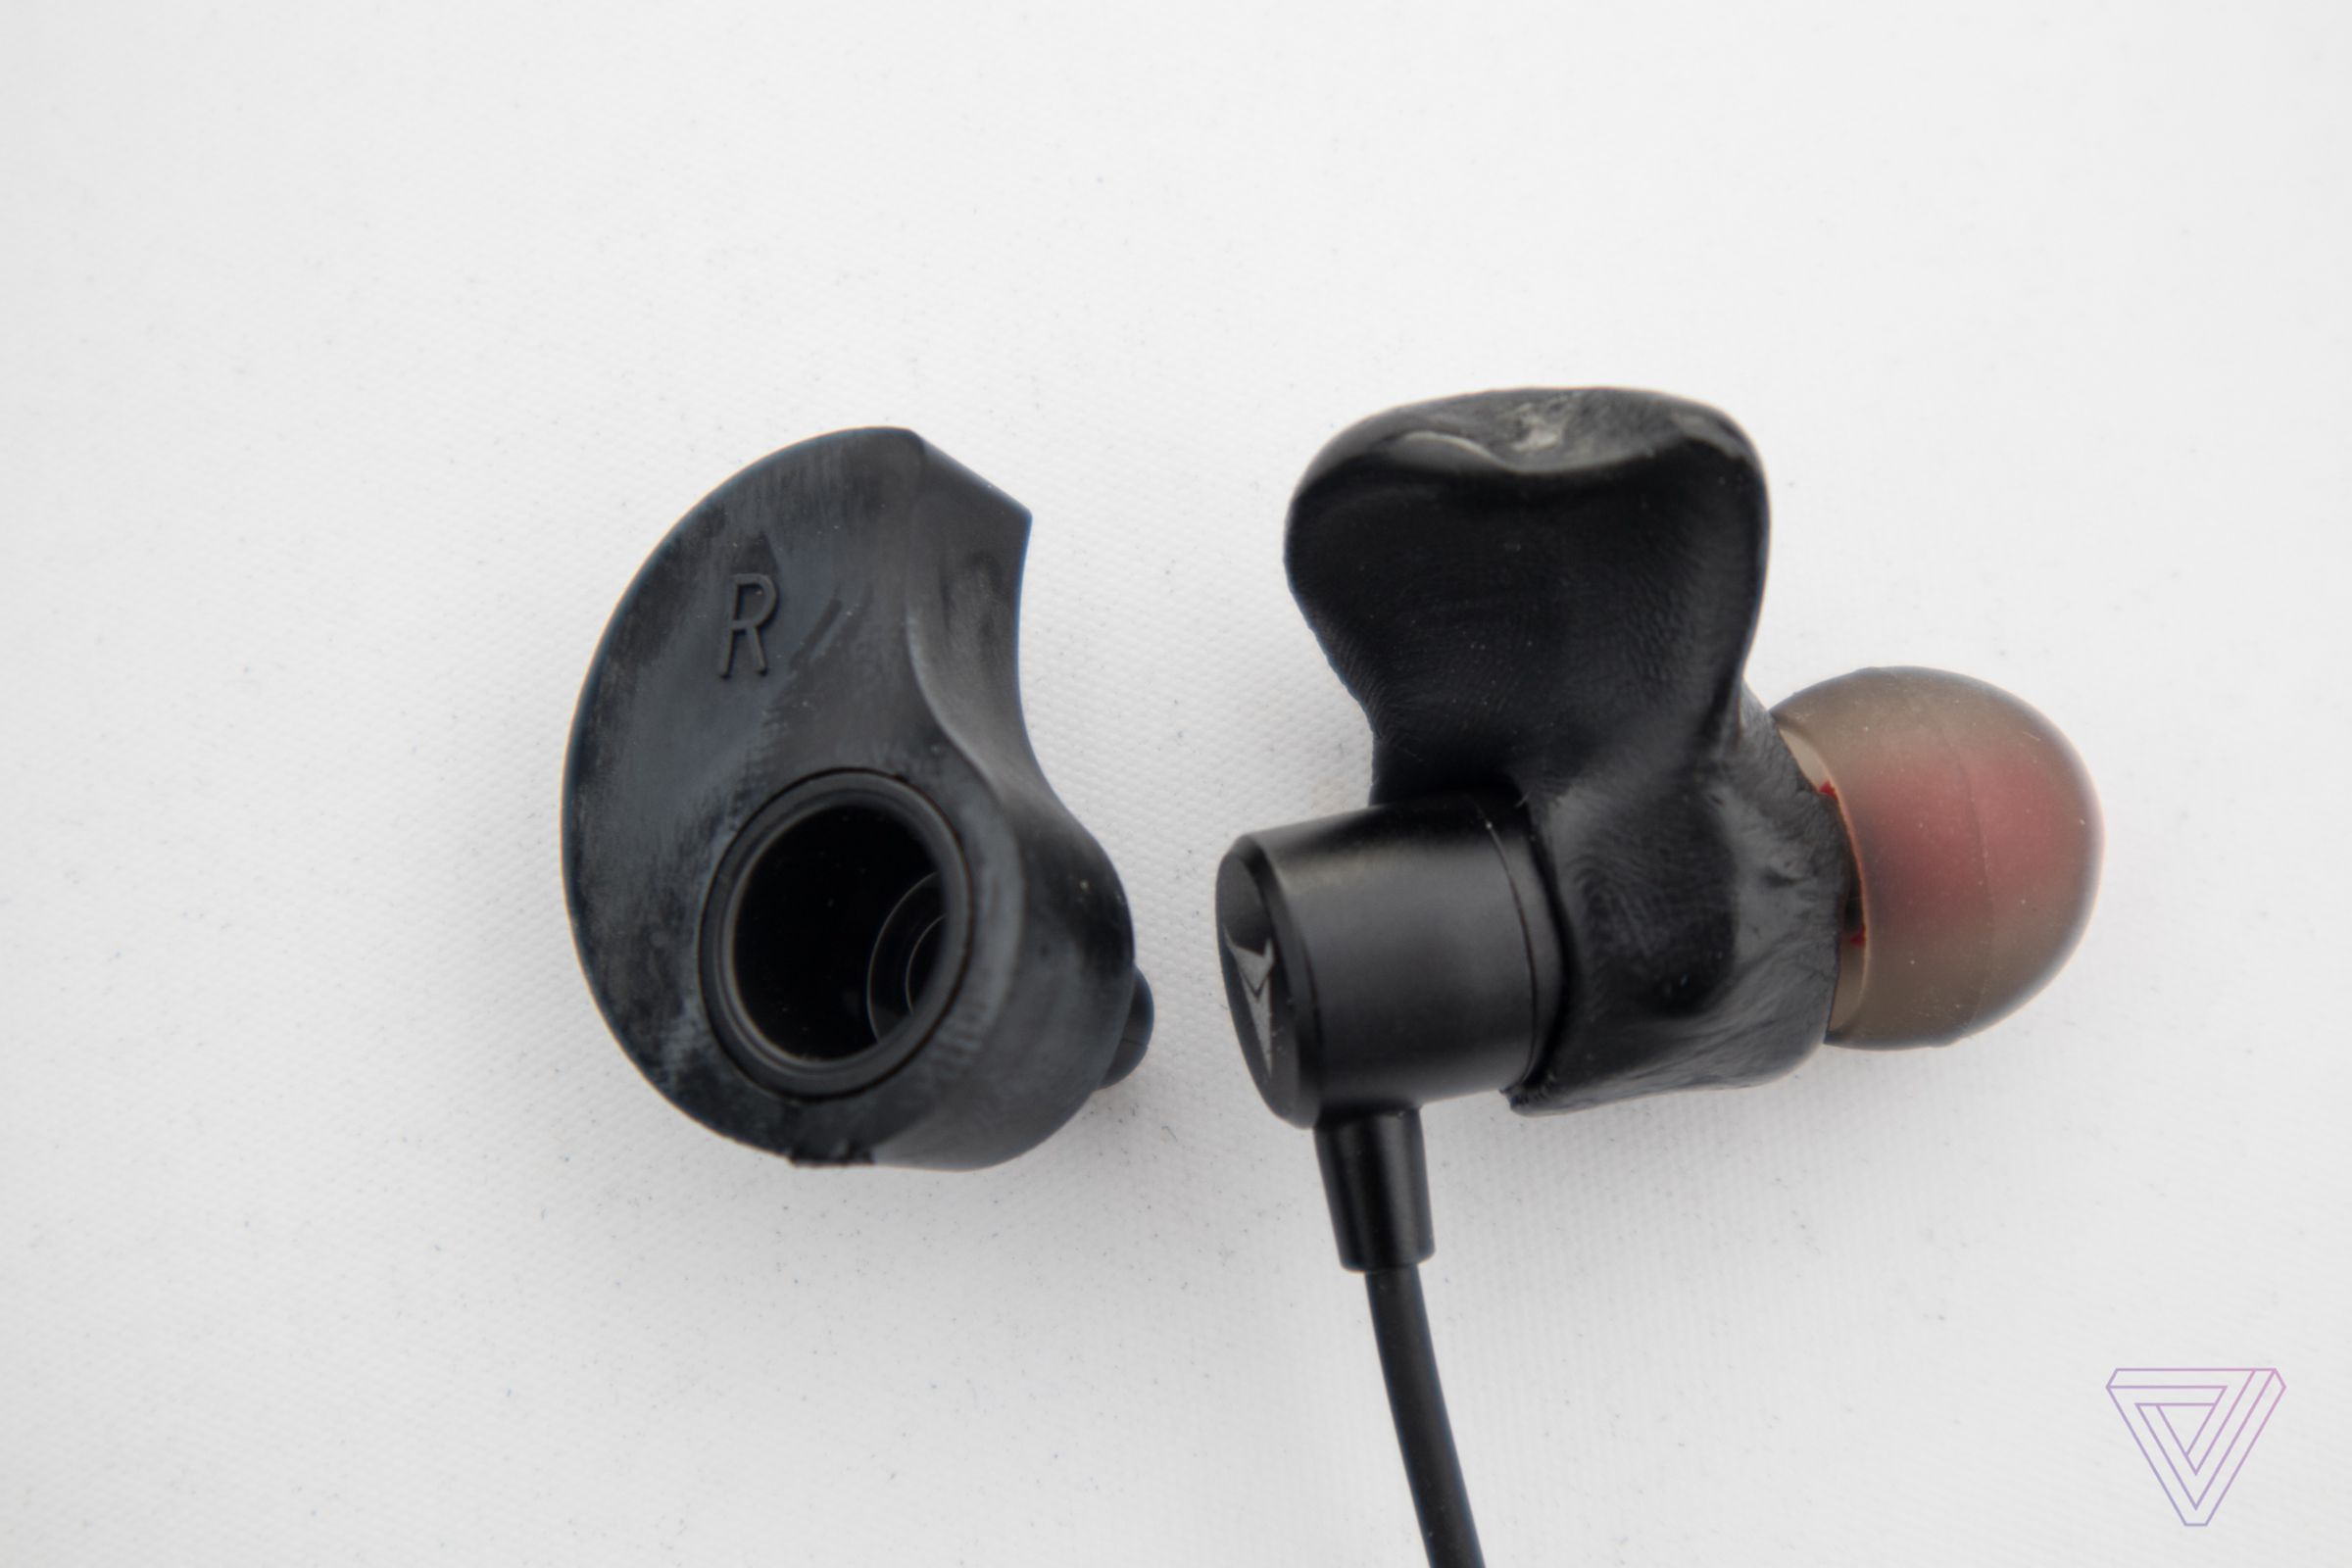 The Decibullz earbud wings before and after.